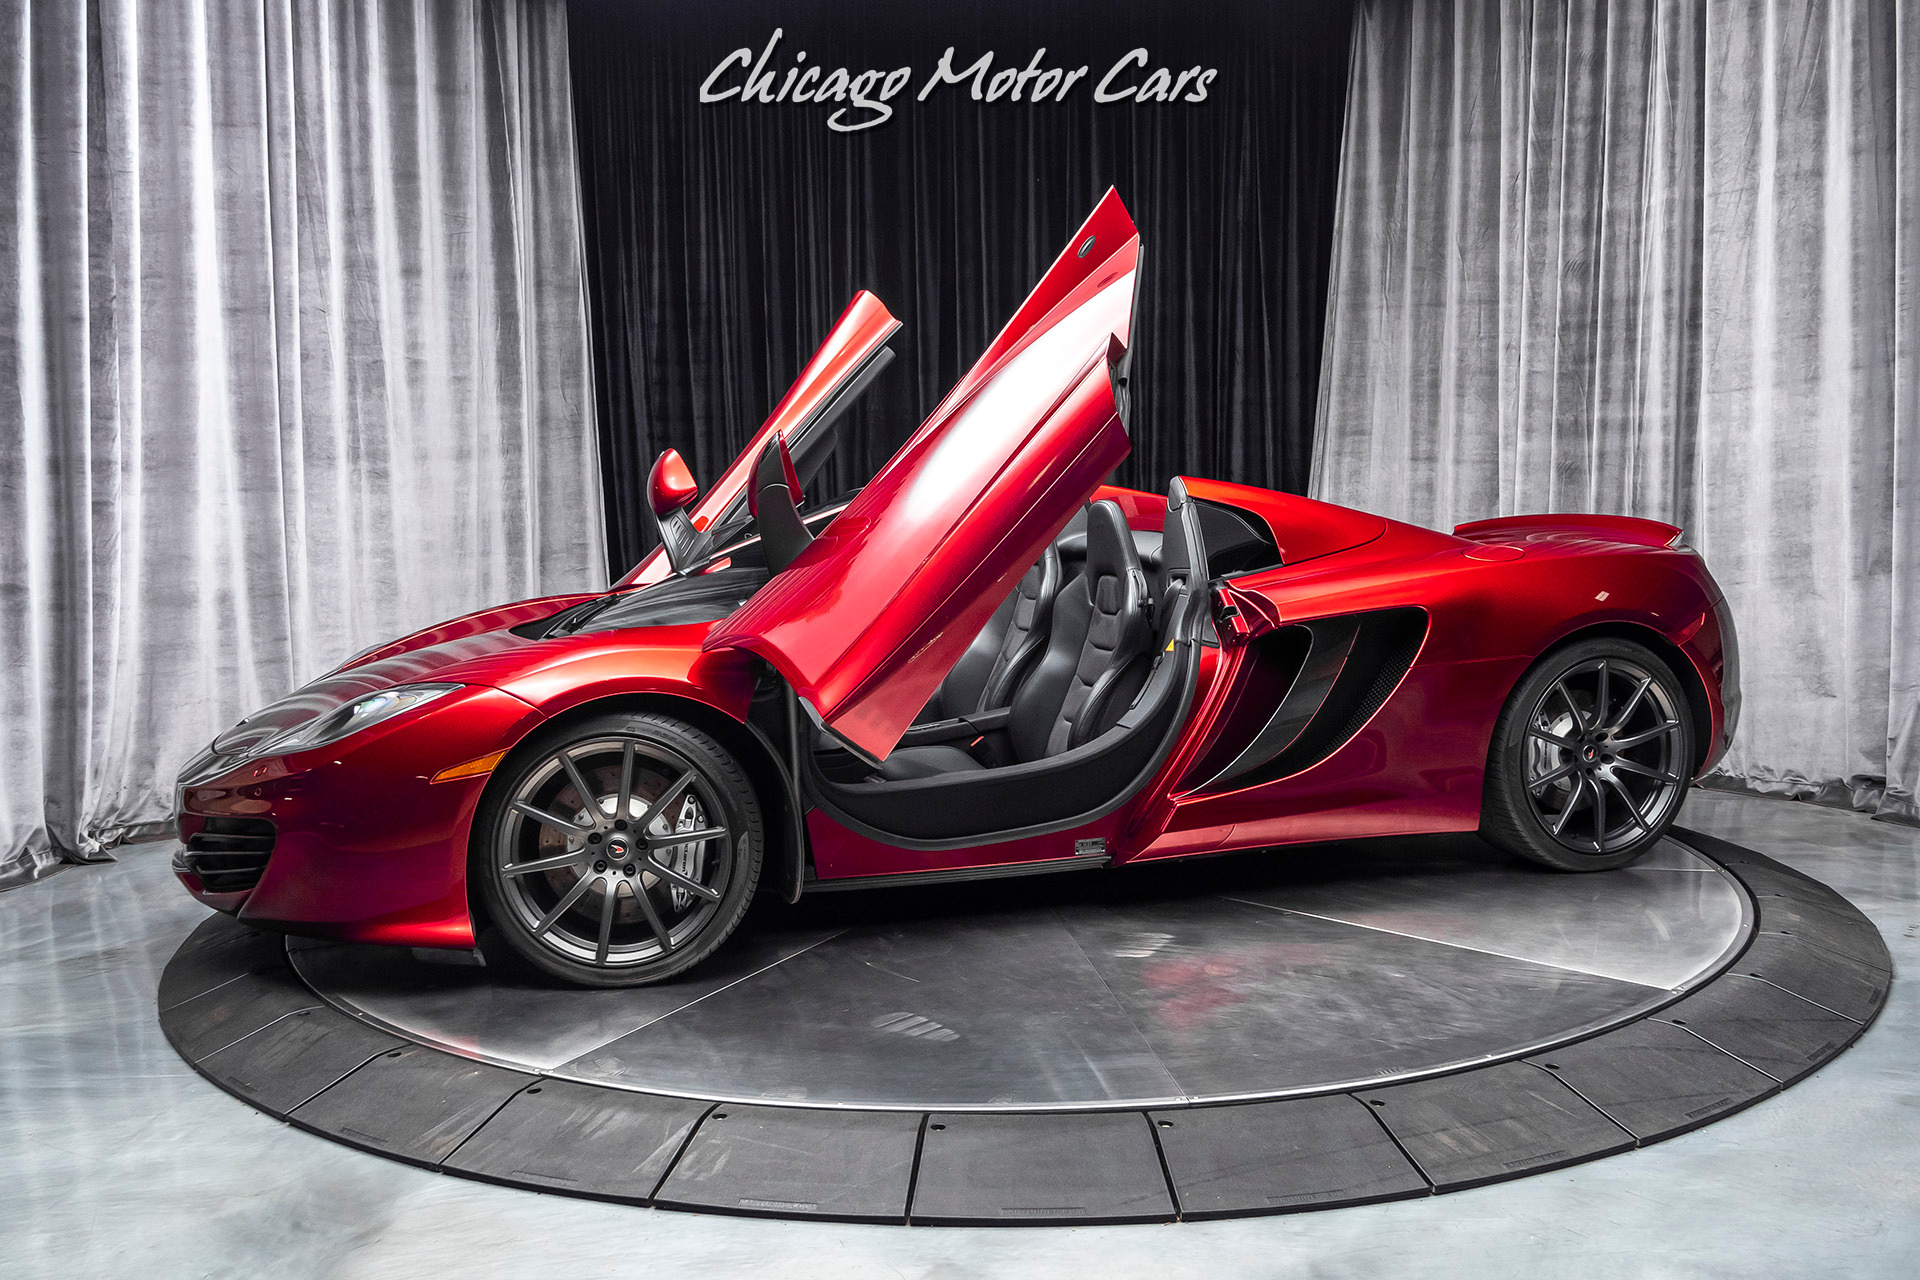 Used 2014 McLaren MP4-12C Spider Original MSRP $306k+ VOLCANO RED ELITE!  Serviced LOADED w/OPTIONS! For Sale (Special Pricing) | Chicago Motor Cars  Stock #17323